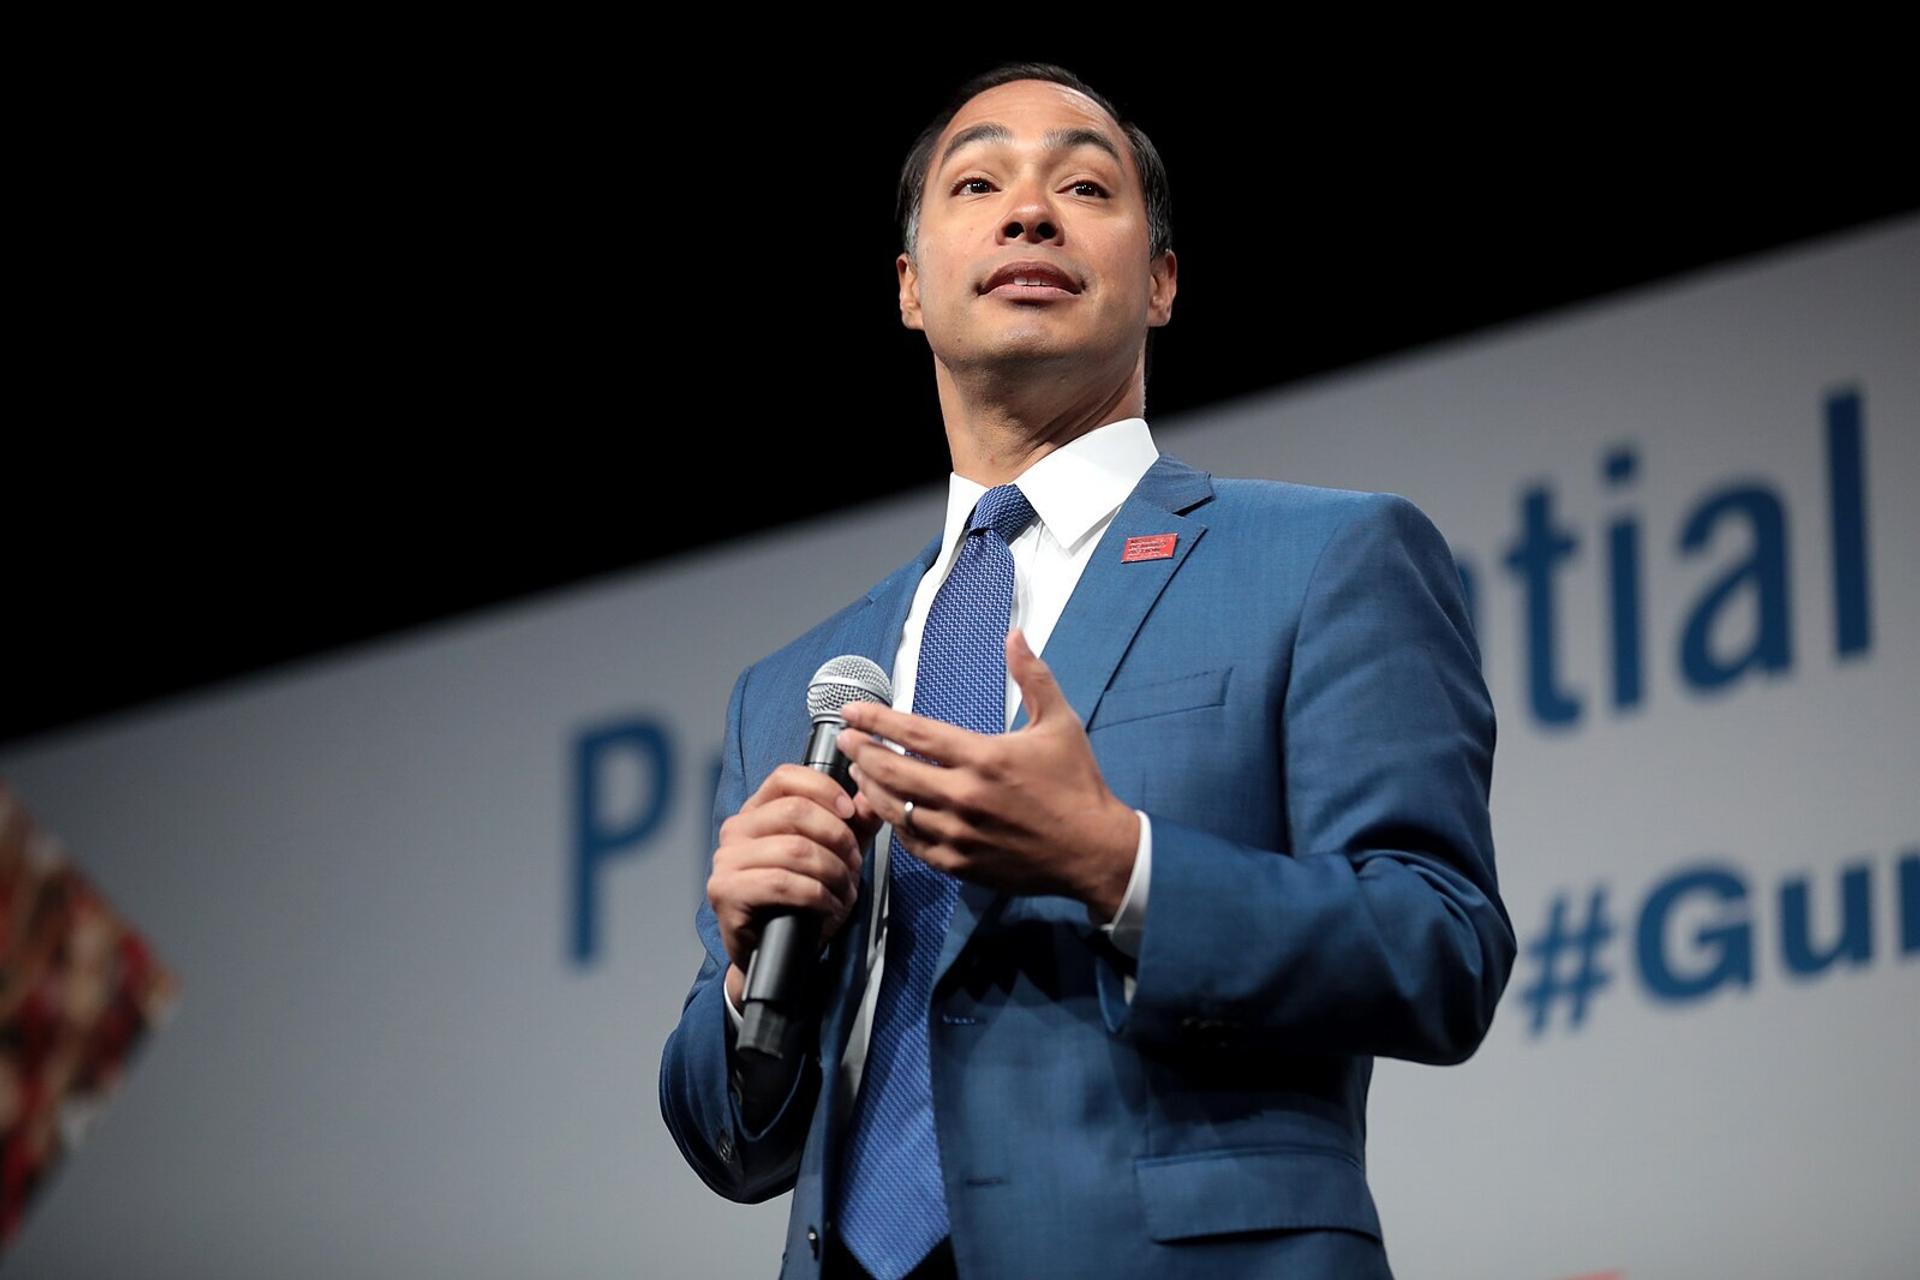 Former Secetary of Housing and Urban Development Julian Castro speaking with attendees at the Presidential Gun Sense Forum hosted by Everytown for Gun Safety and Moms Demand Action at the Iowa Events Center in Des Moines, Iowa.